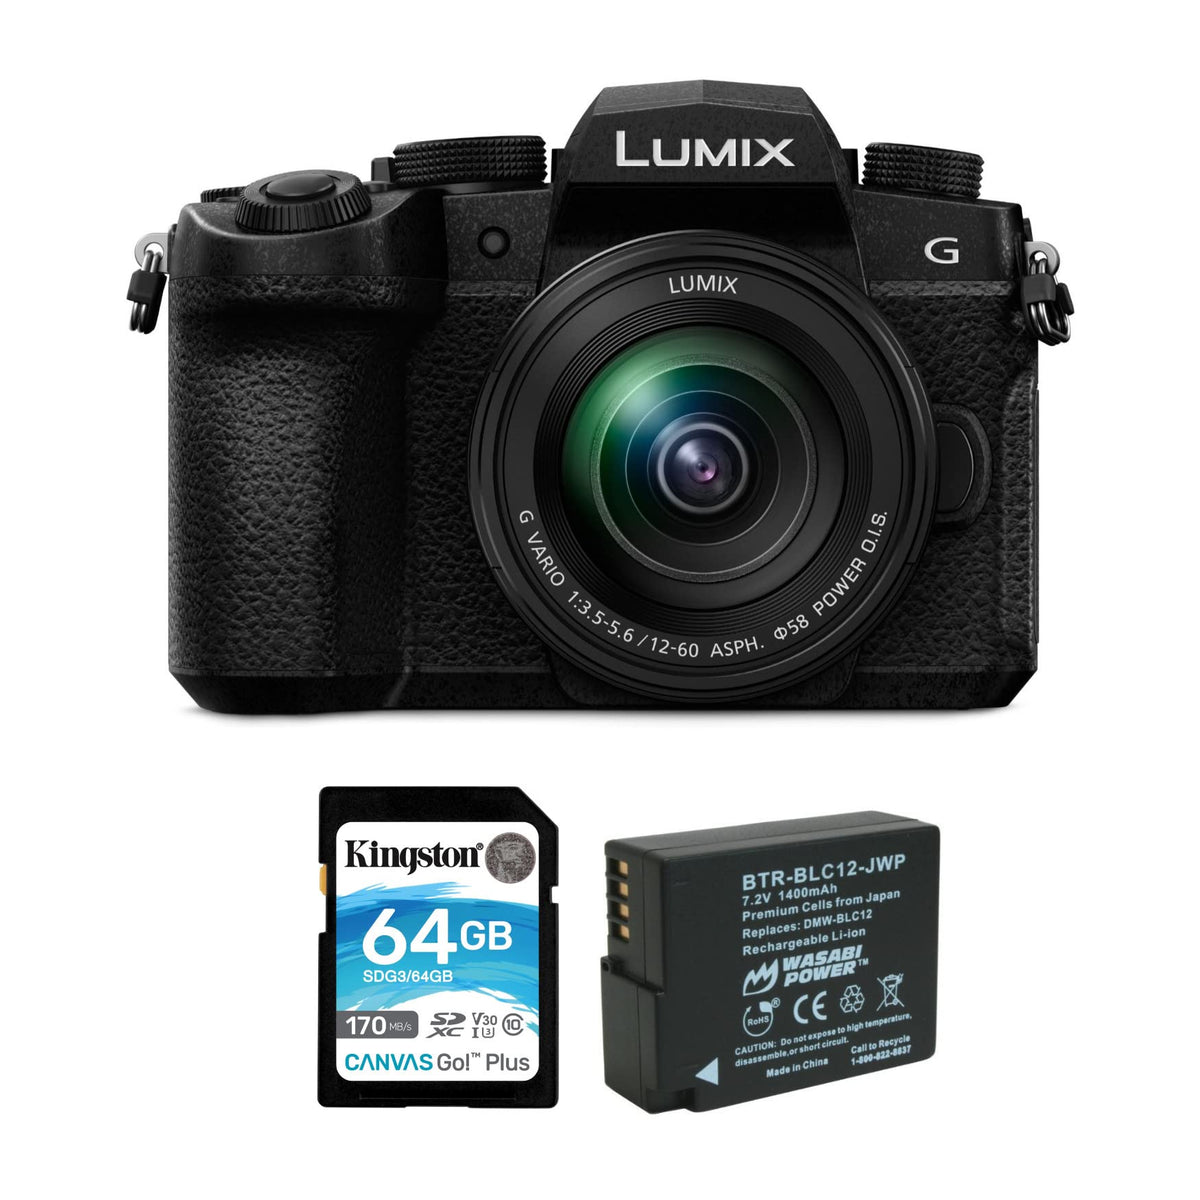 Panasonic Lumix G95 Hybrid Mirrorless Camera with 12-60mm Lens (DC-G95DMK) Bundle with Replacement Lithium-Ion Battery and Memory Card (3 Items)